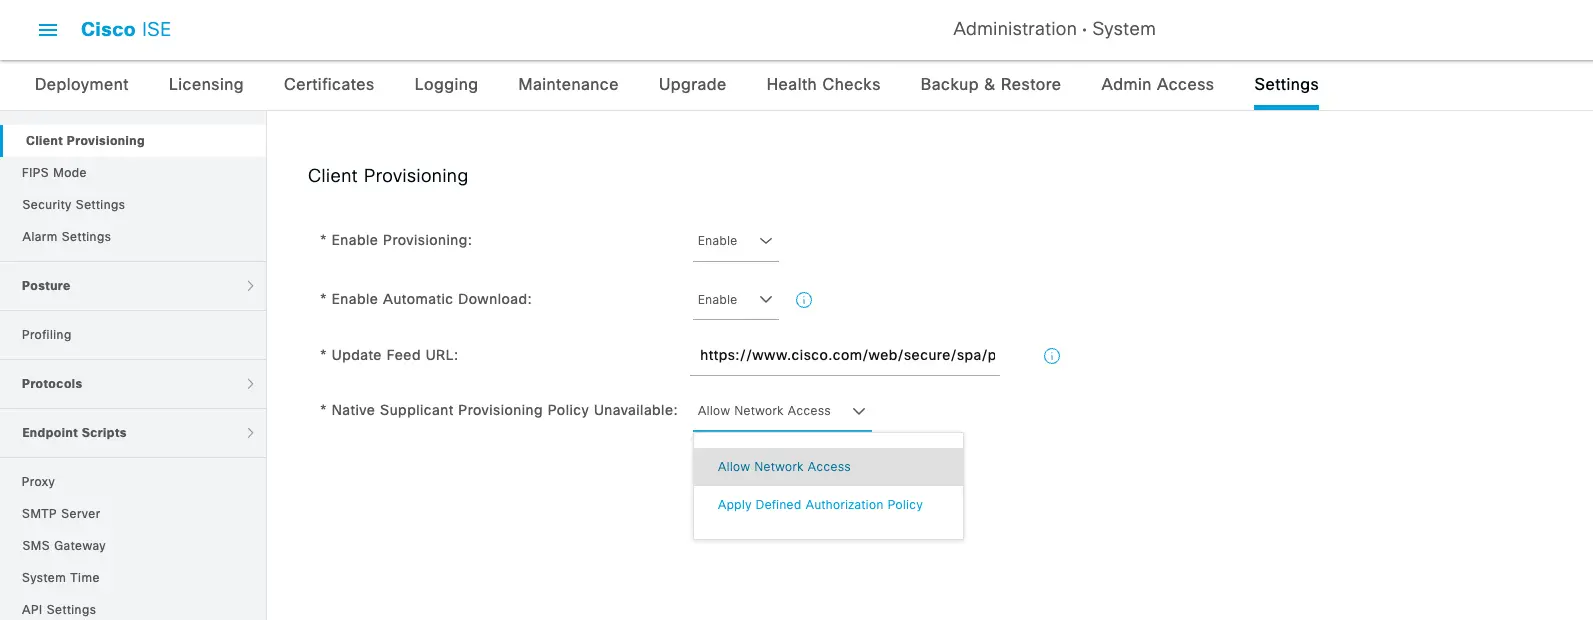 Cisco ISE Client Provisioning Settings